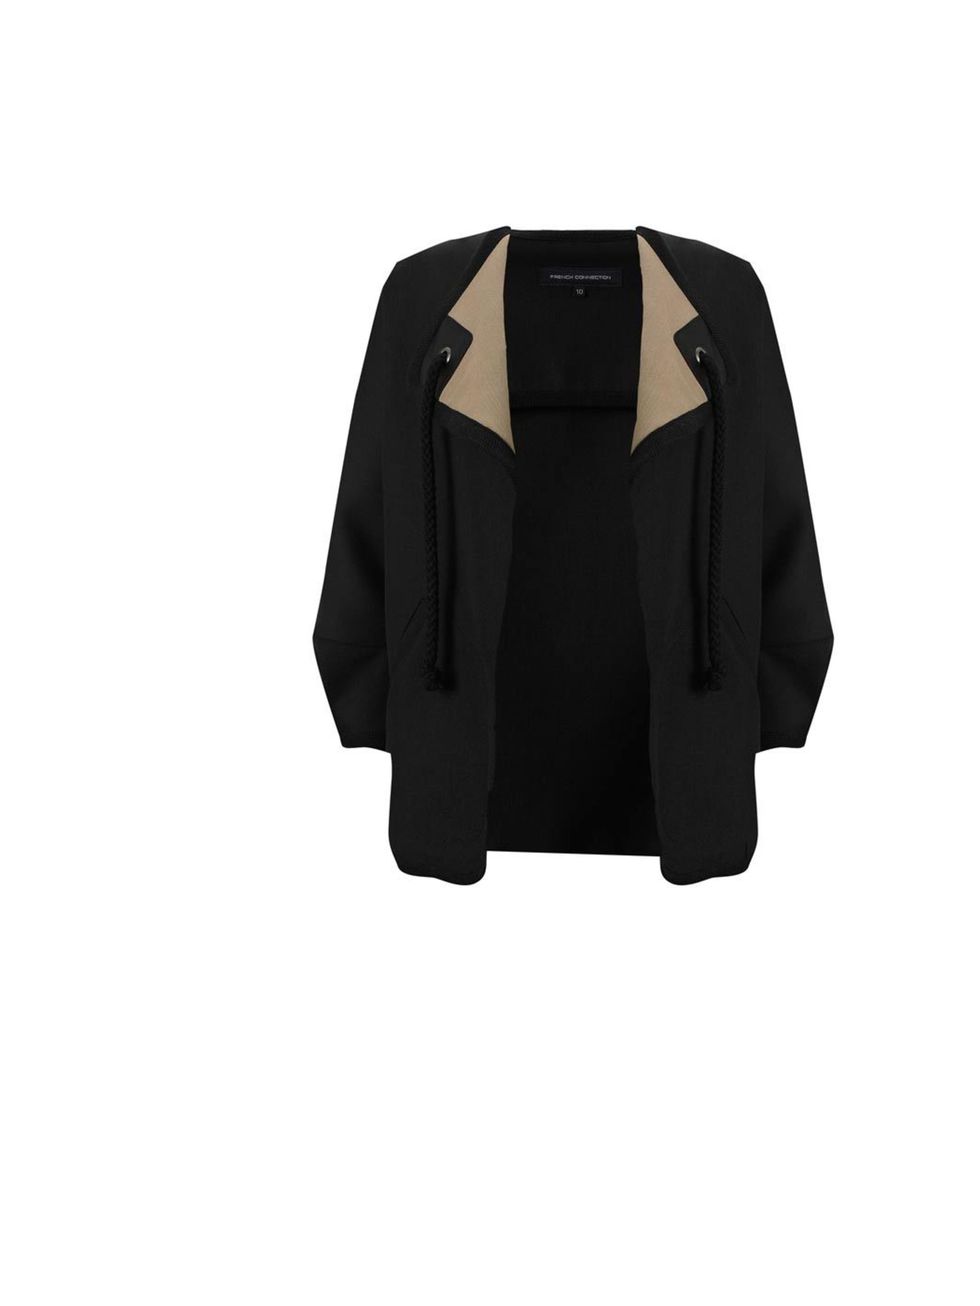 <p><a href="http://www.frenchconnection.com/product/Woman+Collections+Coats+And+Jackets/75AQ7/Imperial+Lux+Jacket.htm">French Connection</a> 'Imperial Lux' jacket, £140</p>